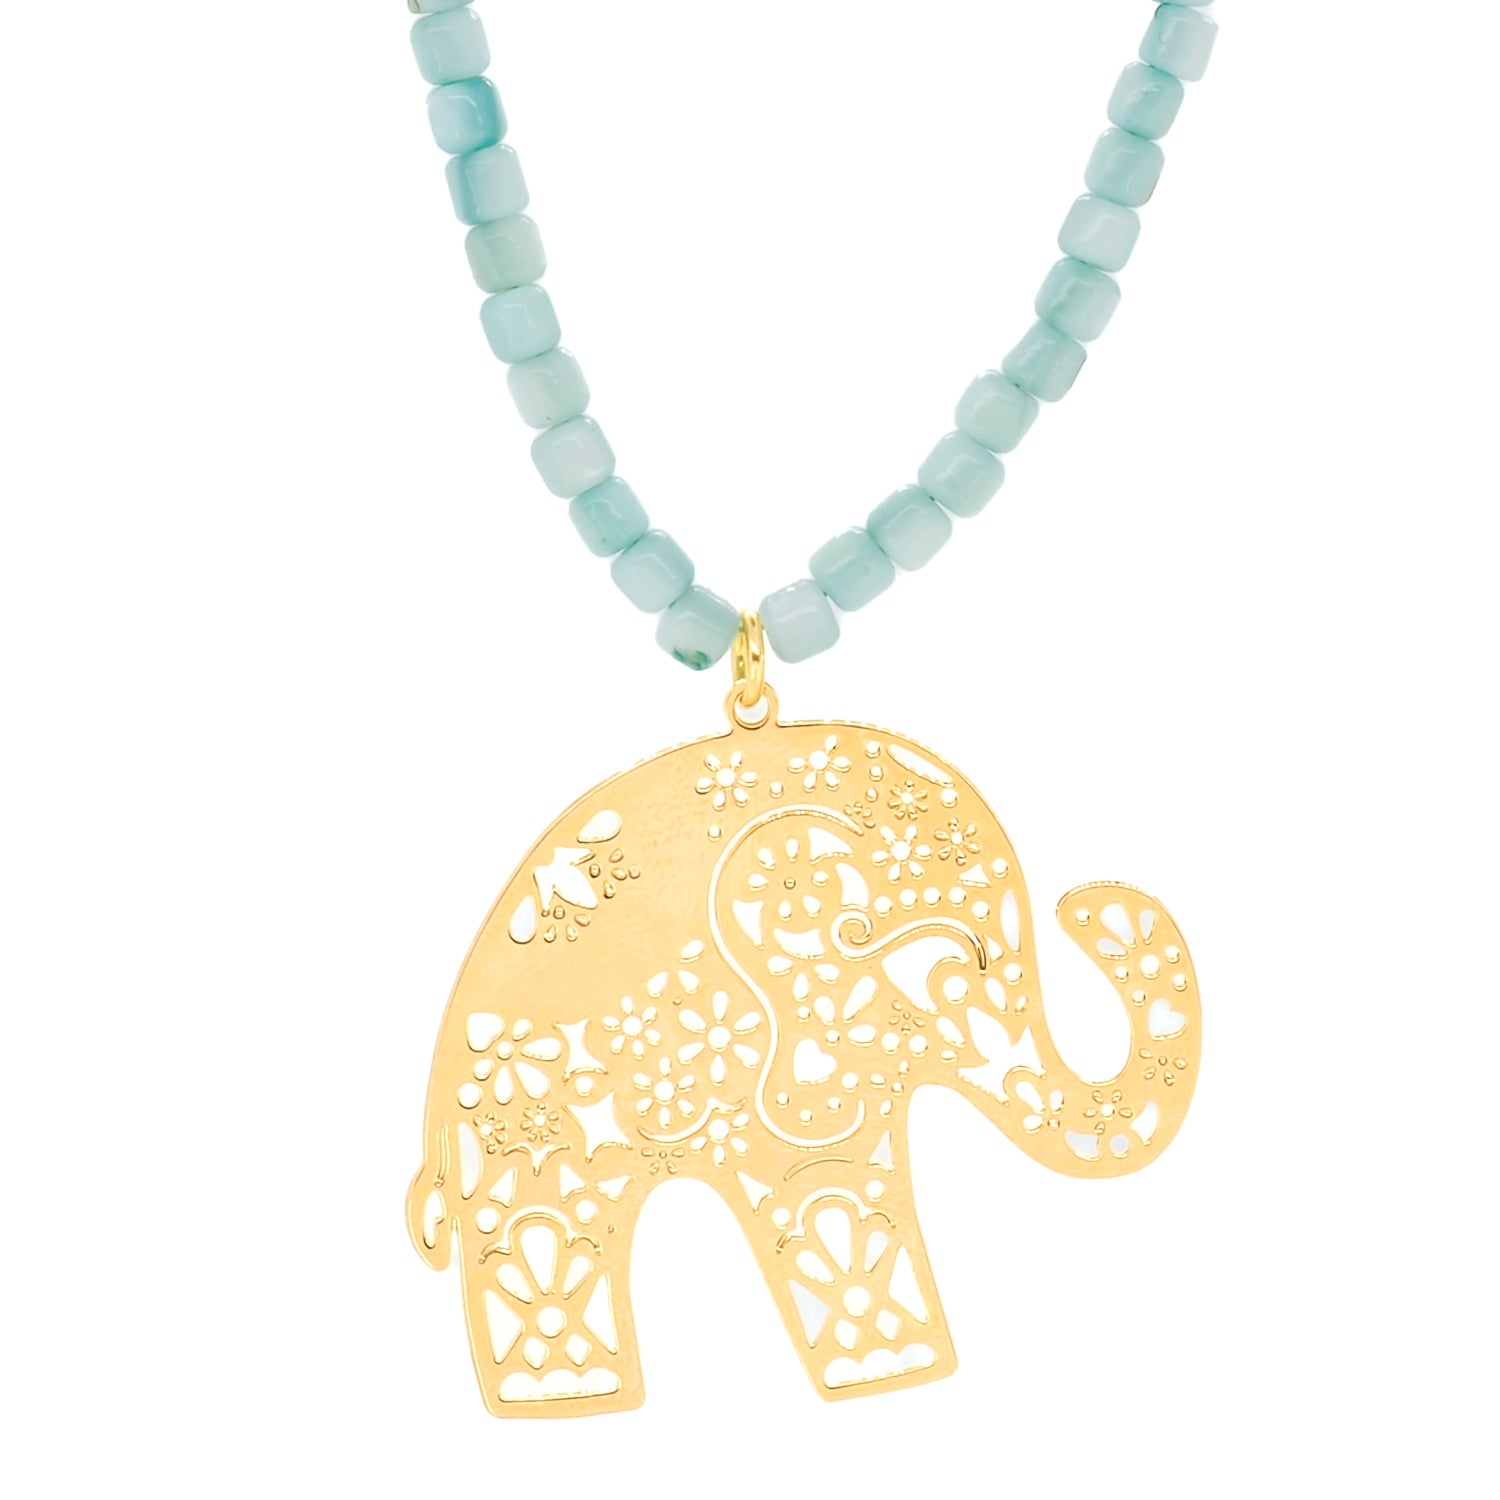 Handcrafted Elephant Necklace for Good Luck and Protection